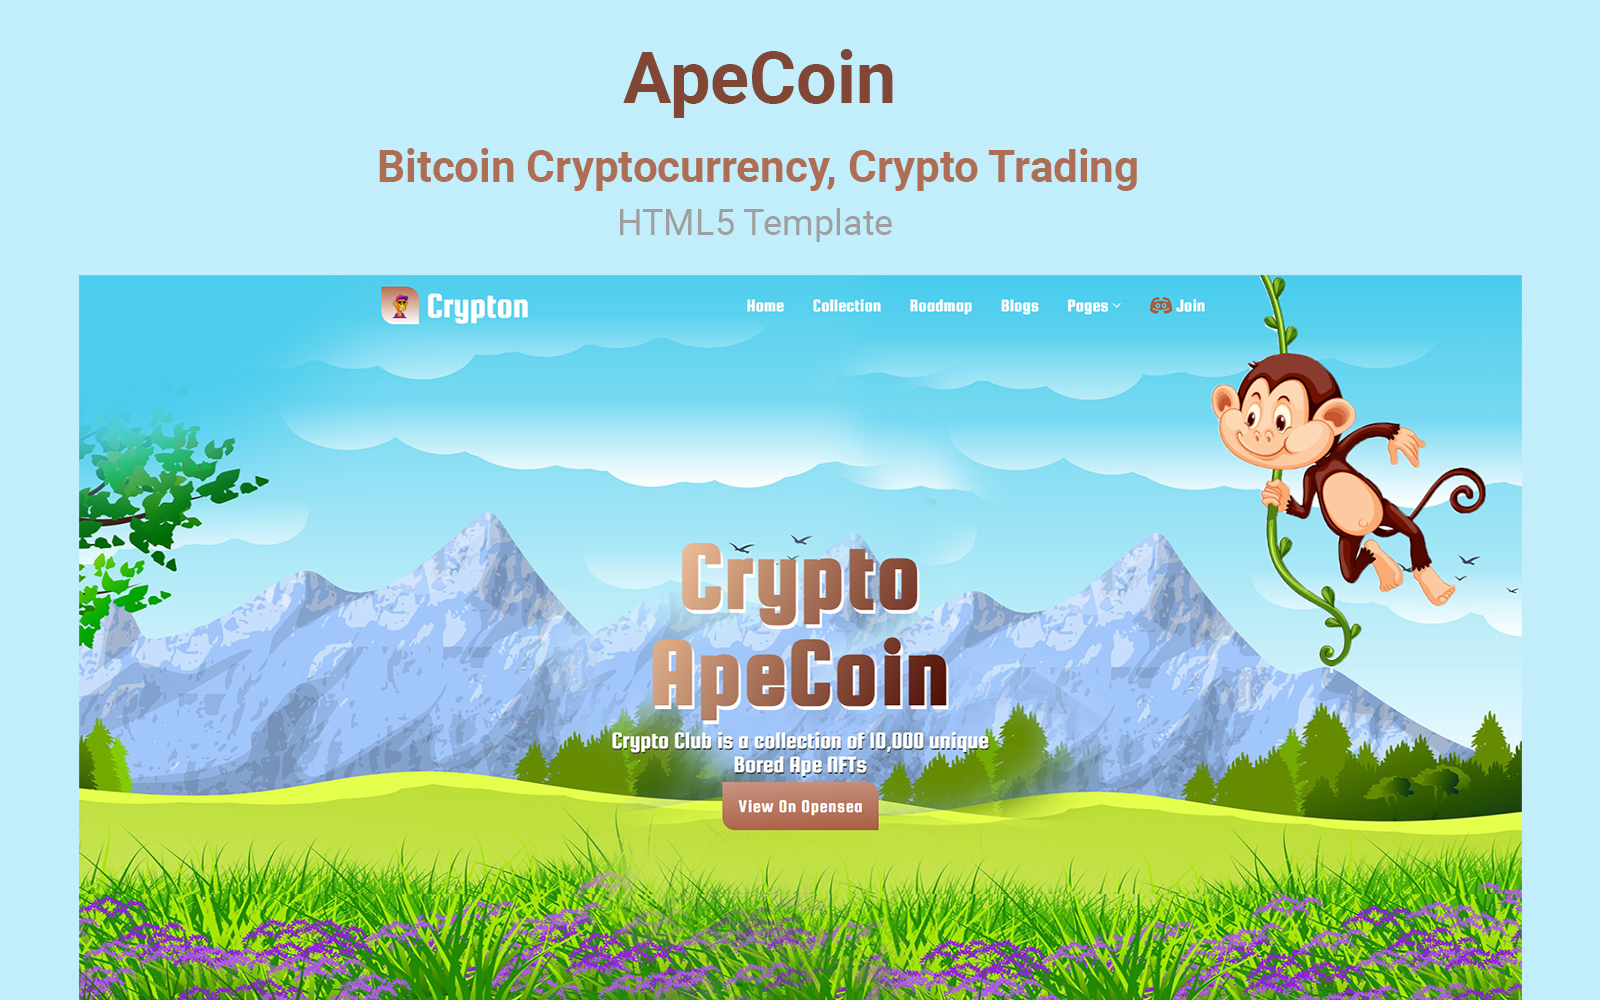 ApeCoin - Bitcoin Cryptocurrency, Crypto Trading Landing Page Template